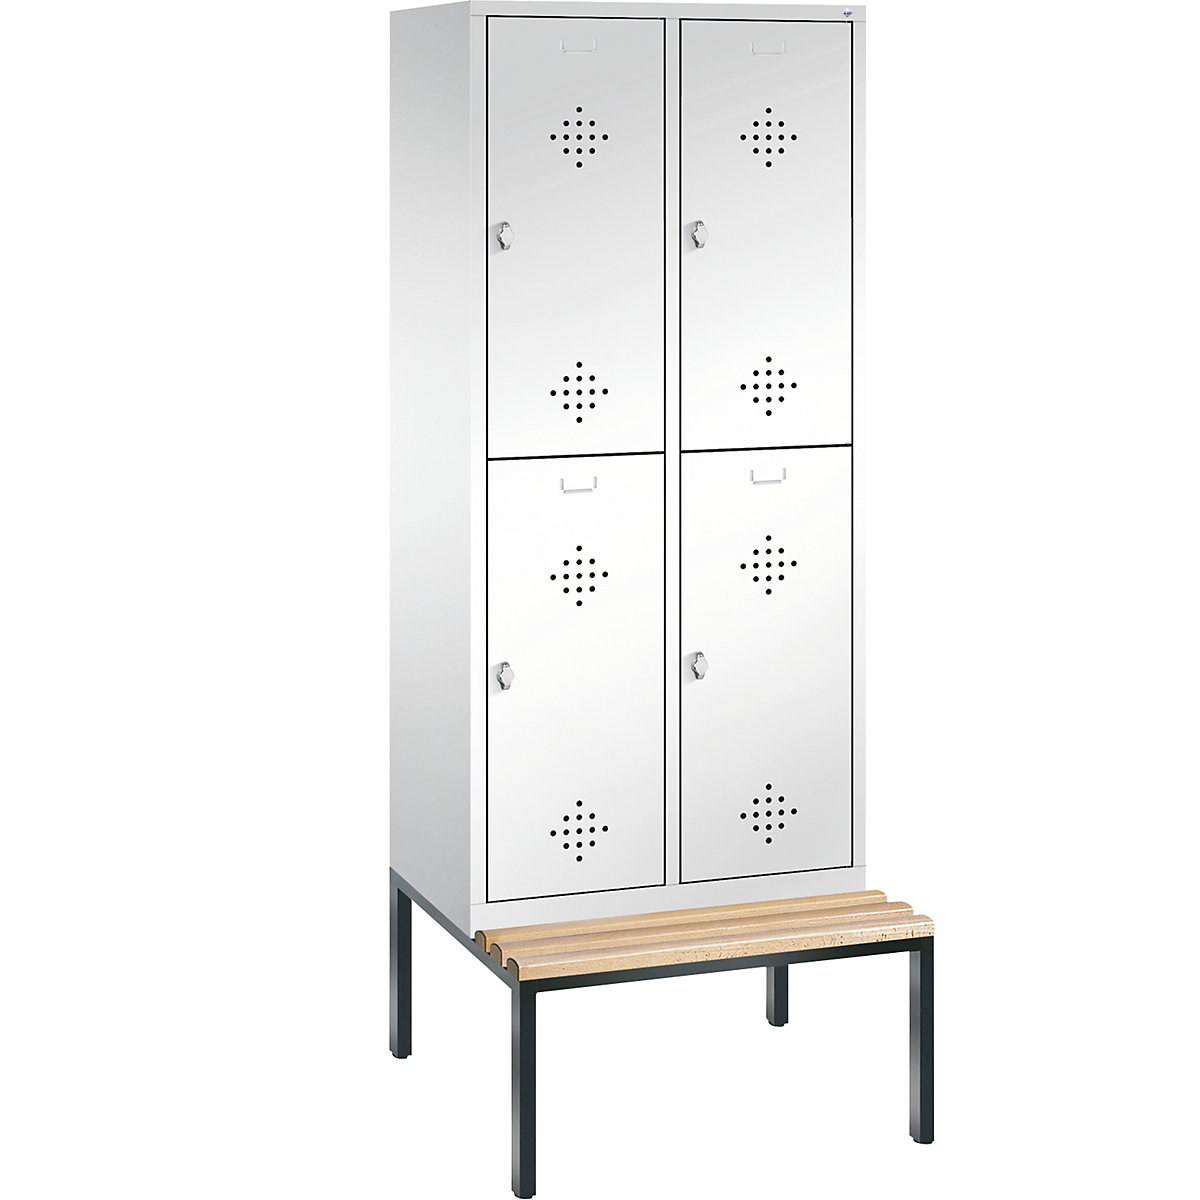 CLASSIC cloakroom locker with bench mounted underneath, double tier - C+P